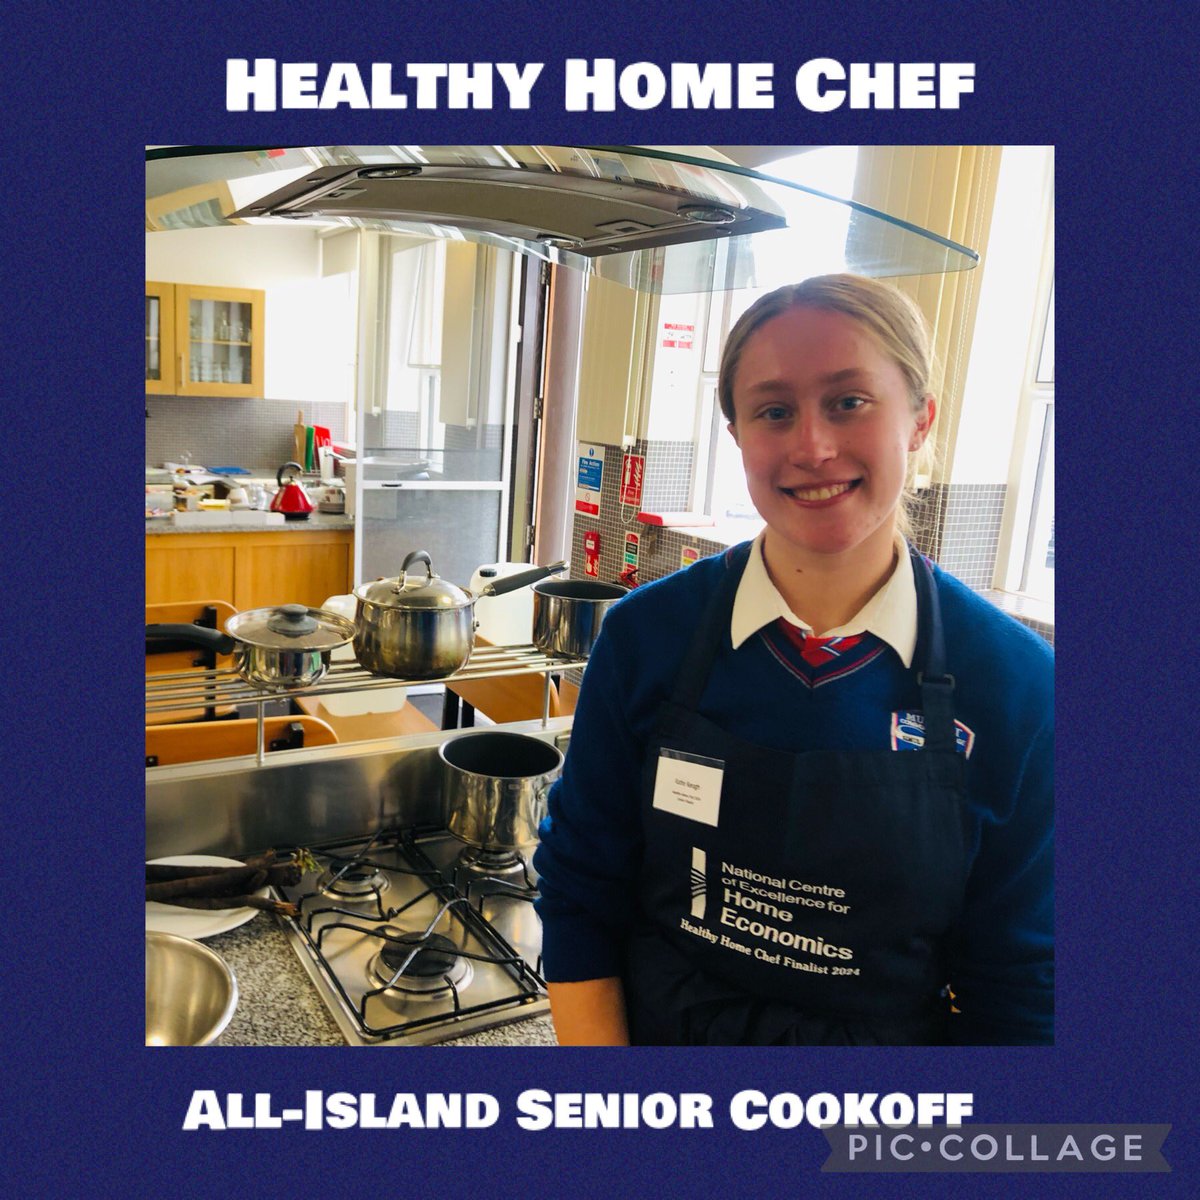 All set and ready to go! Best of luck to Katie in the Healthy Home Chef All-Island Senior Cook Off in ATU St. Angela’s, Sligo. @mungretcc